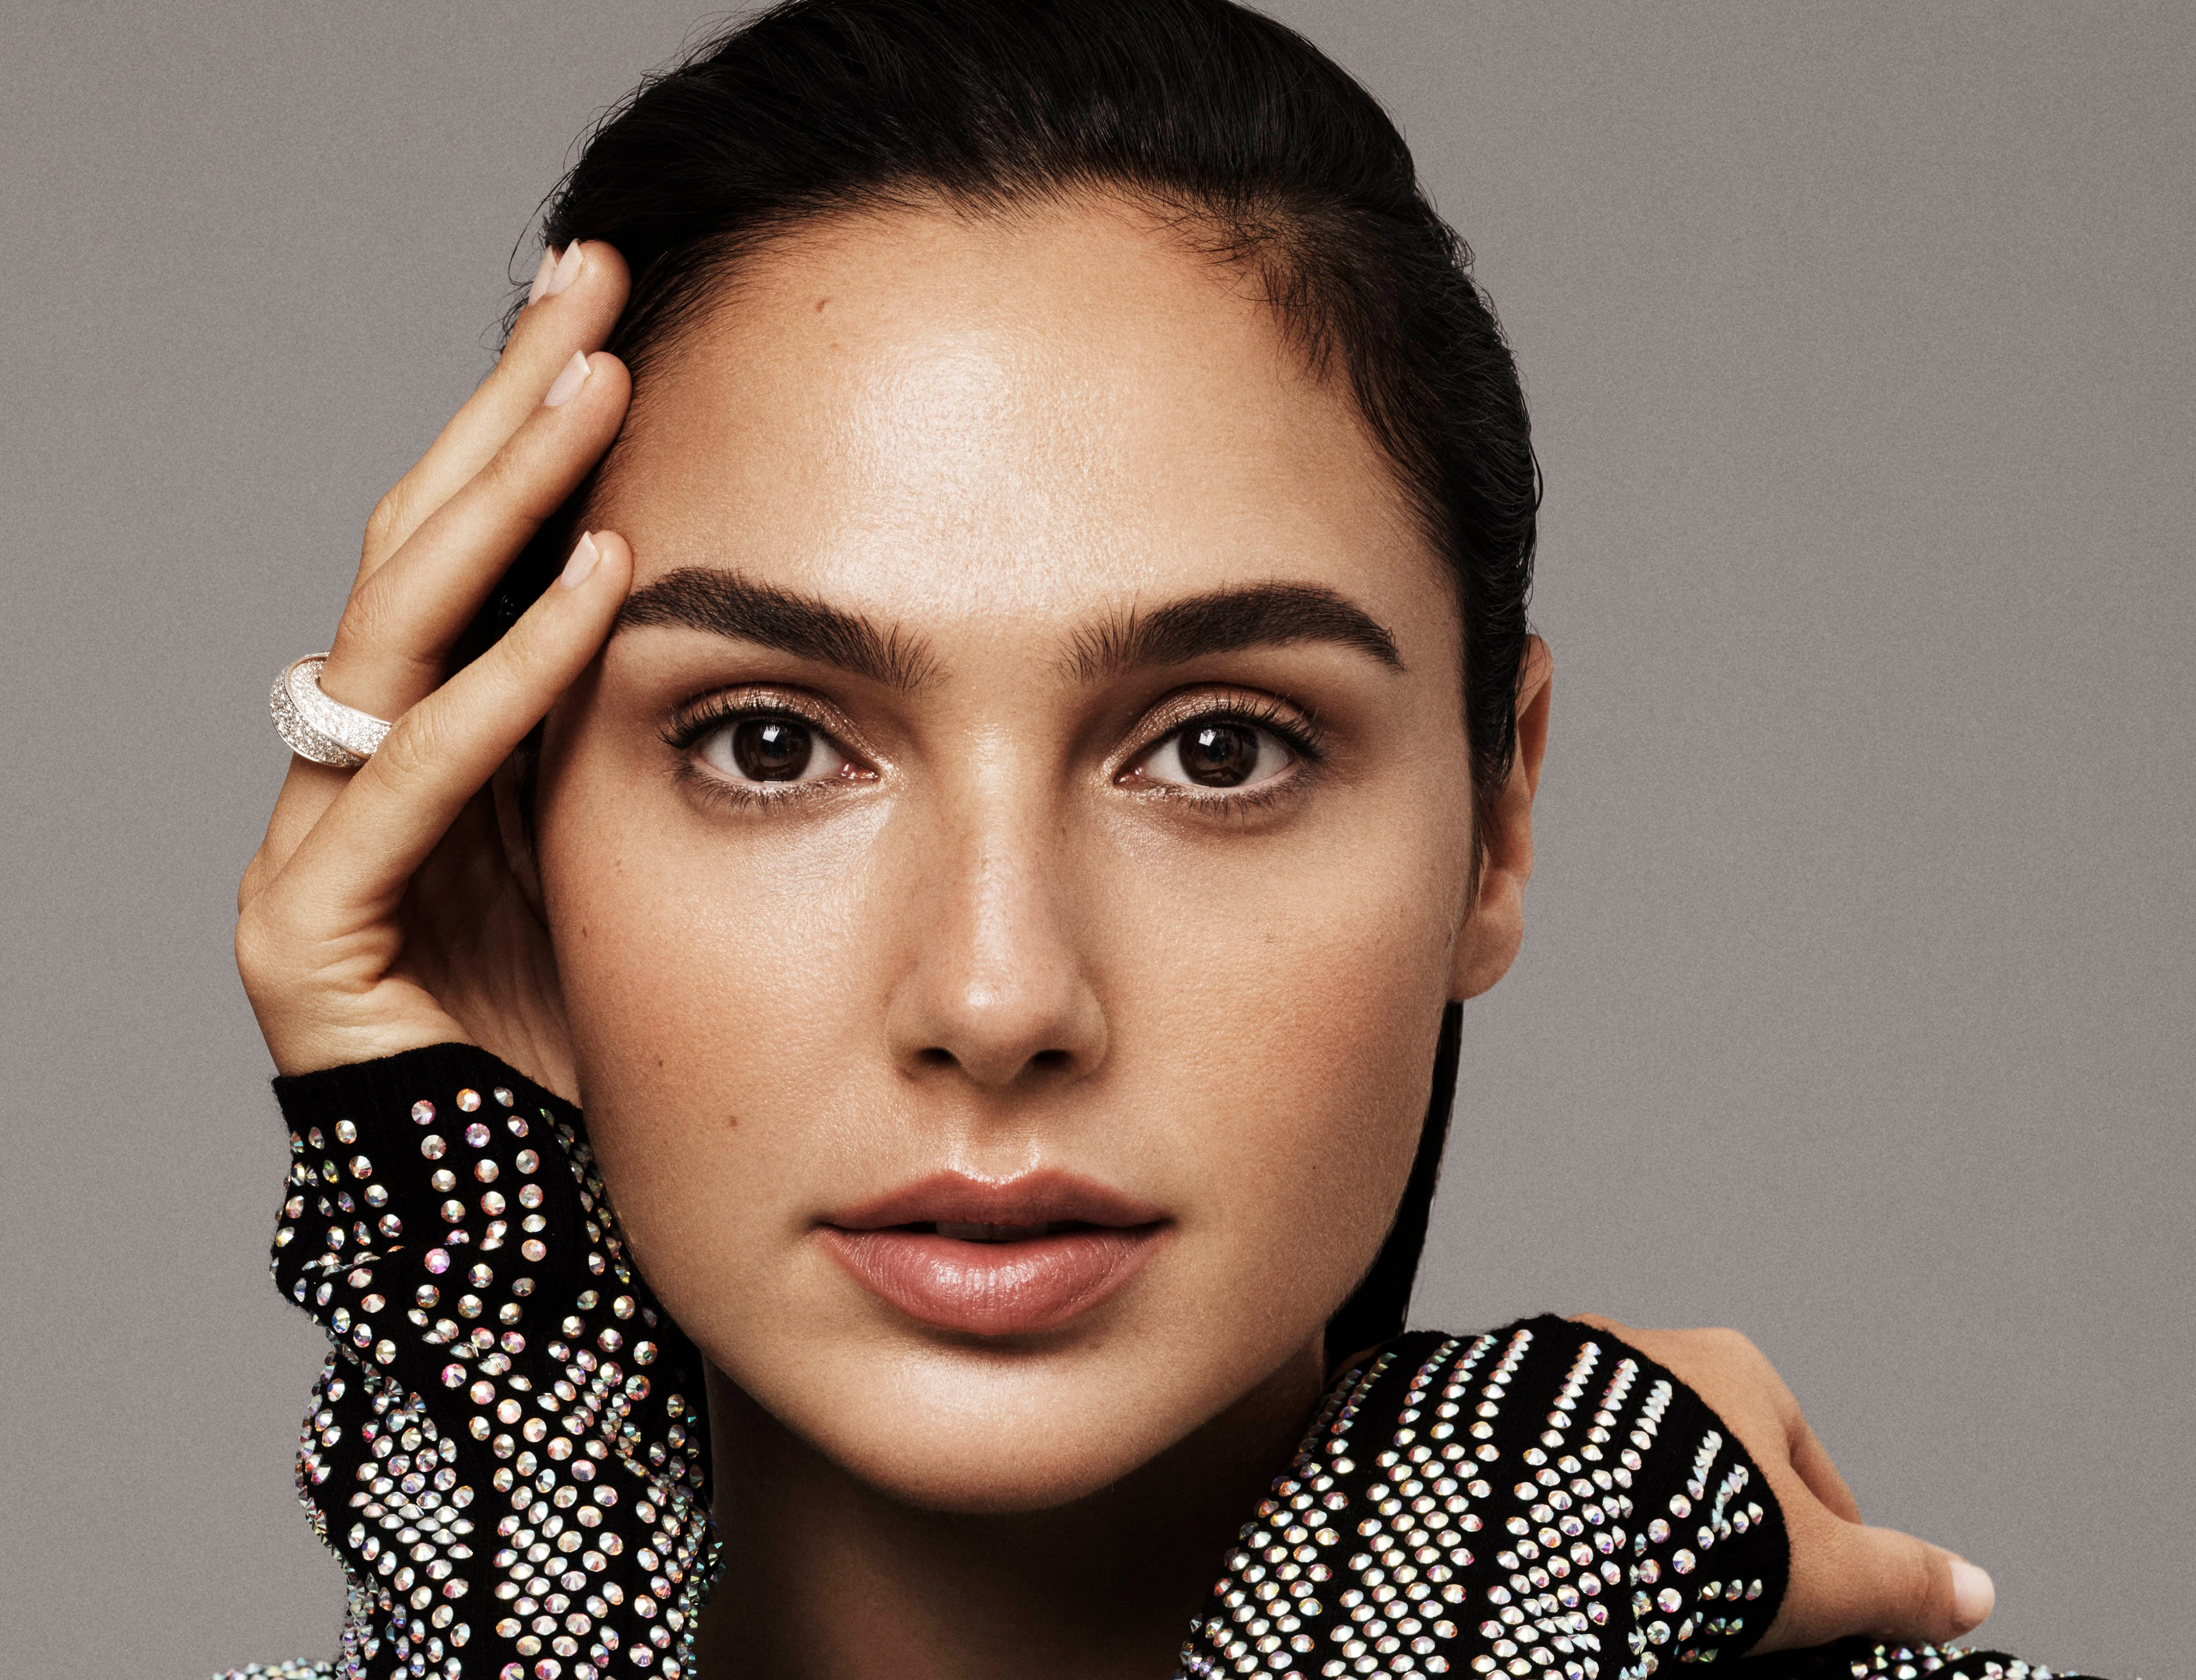 Wallpapers Gal Gadot face hairstyle on the desktop